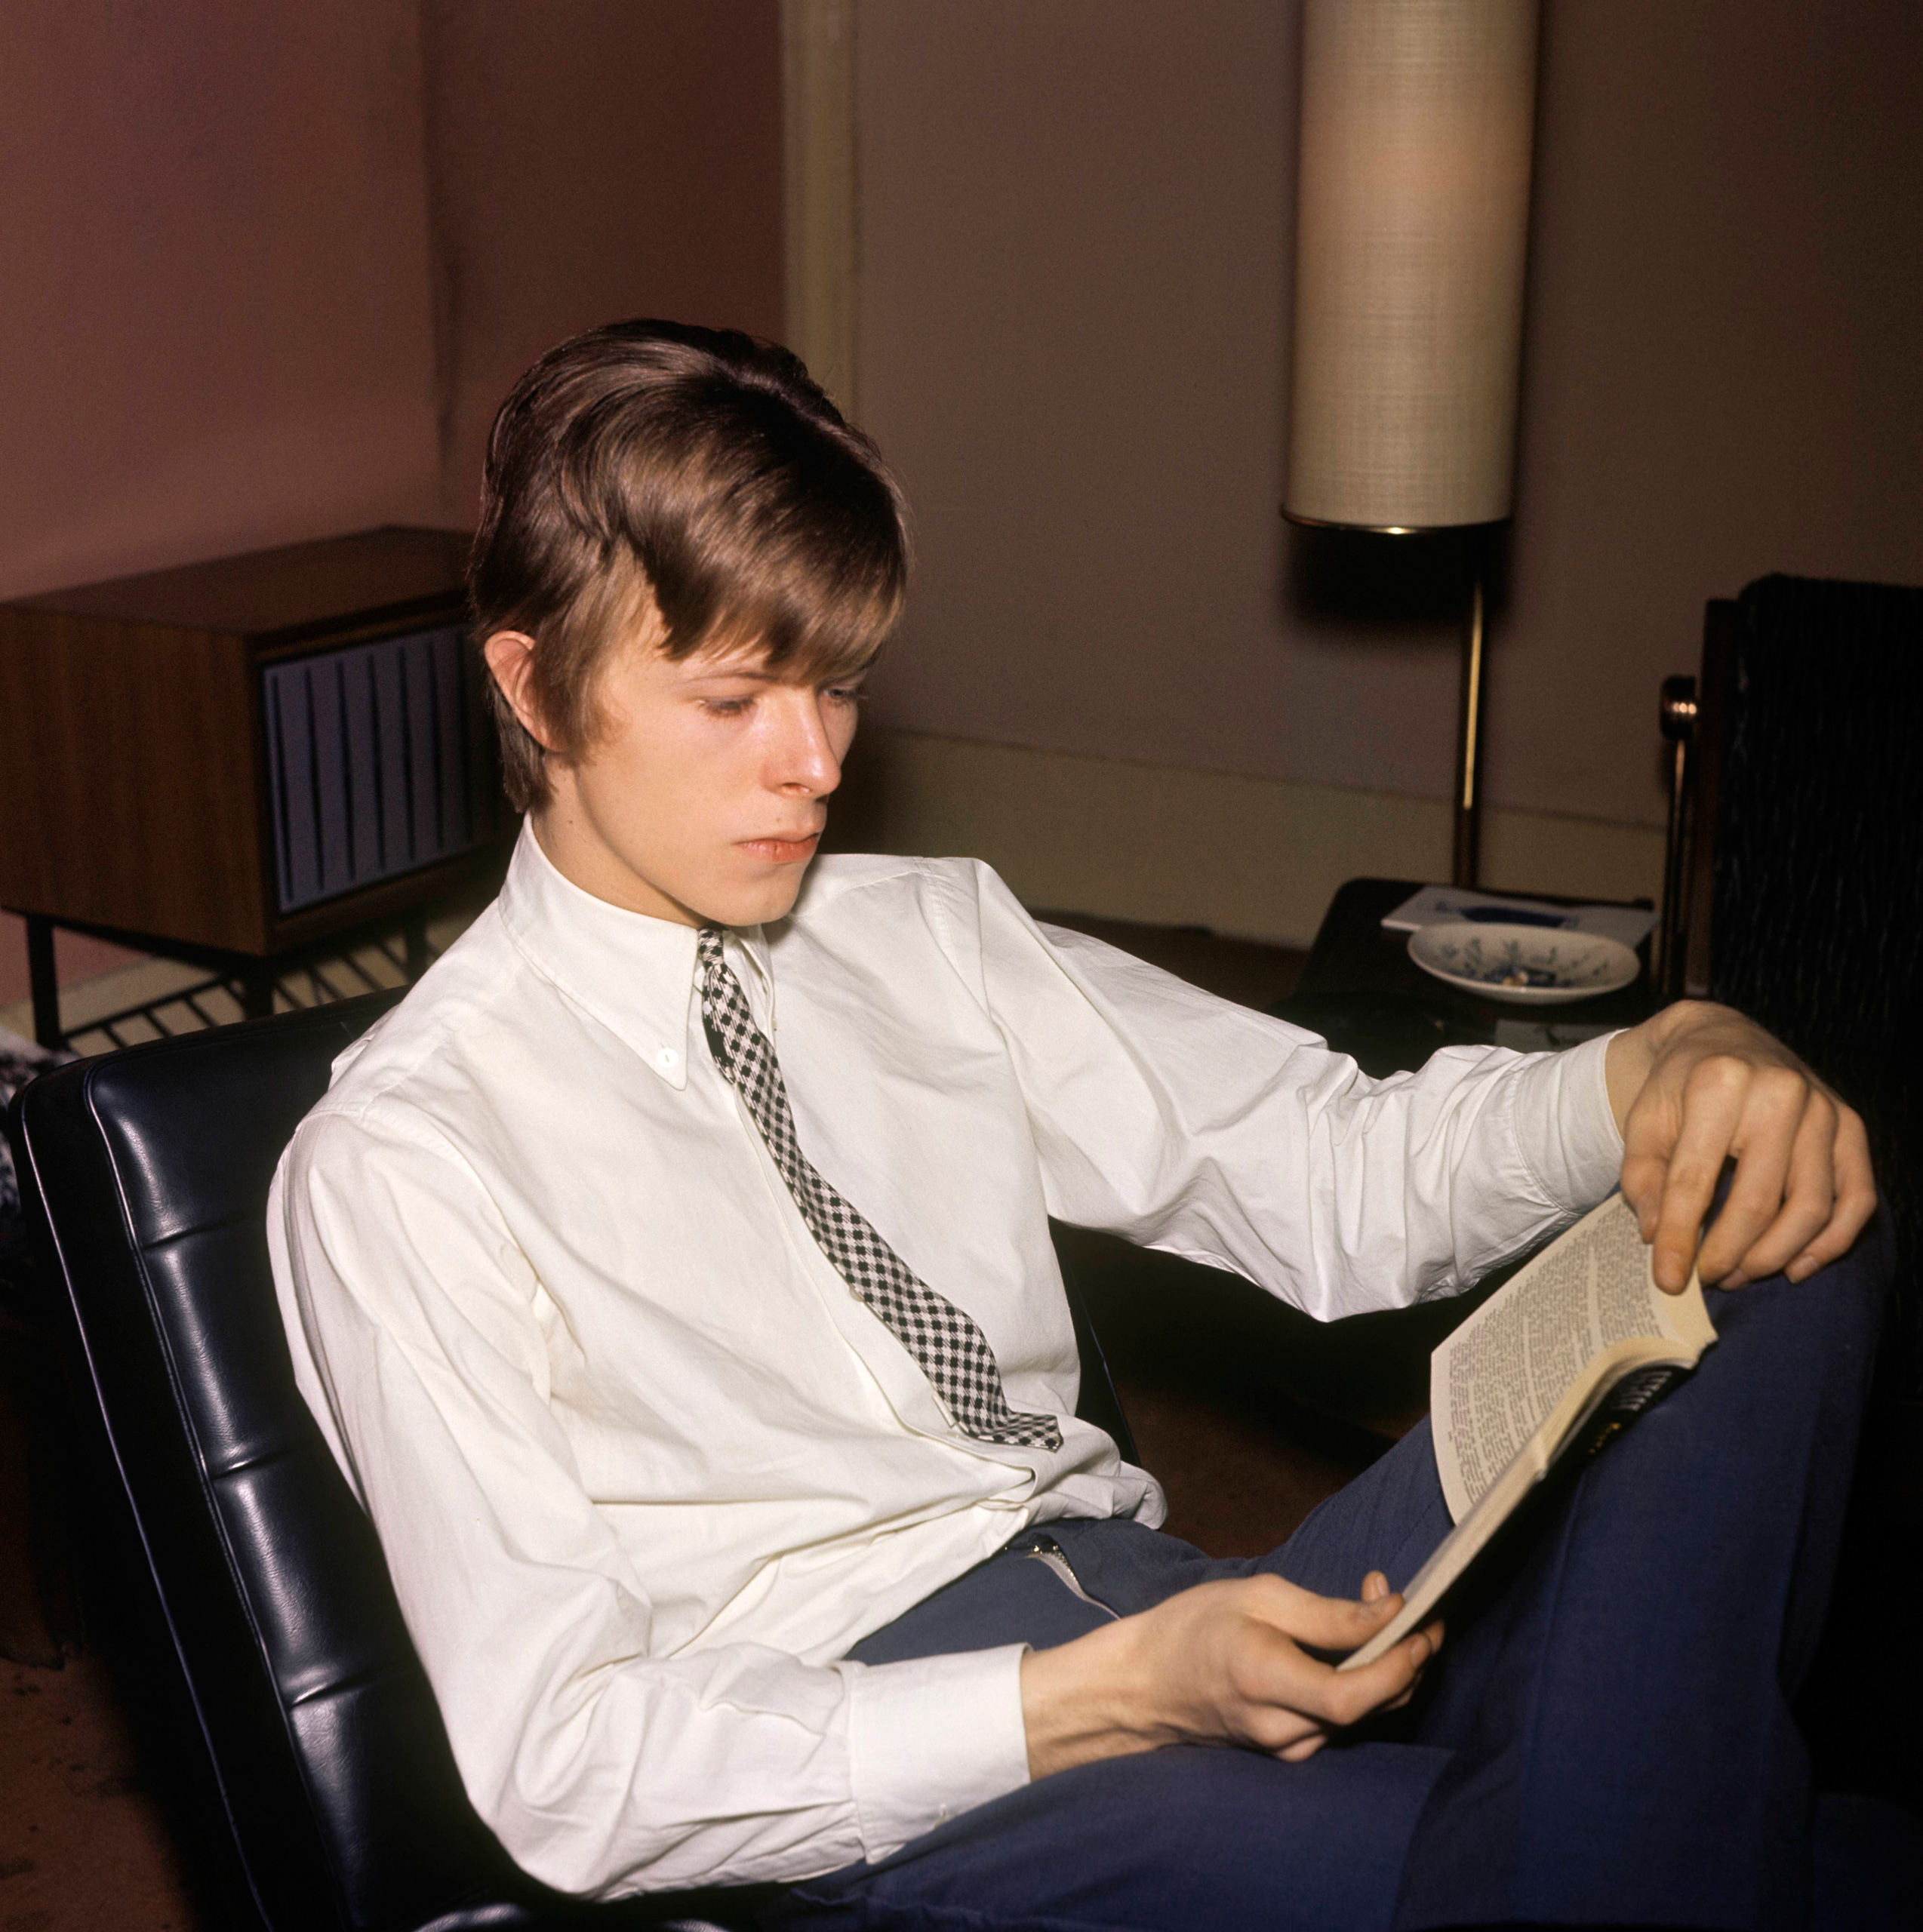 David Bowie photographed reading a book, c. 1965. (CA/Redferns)